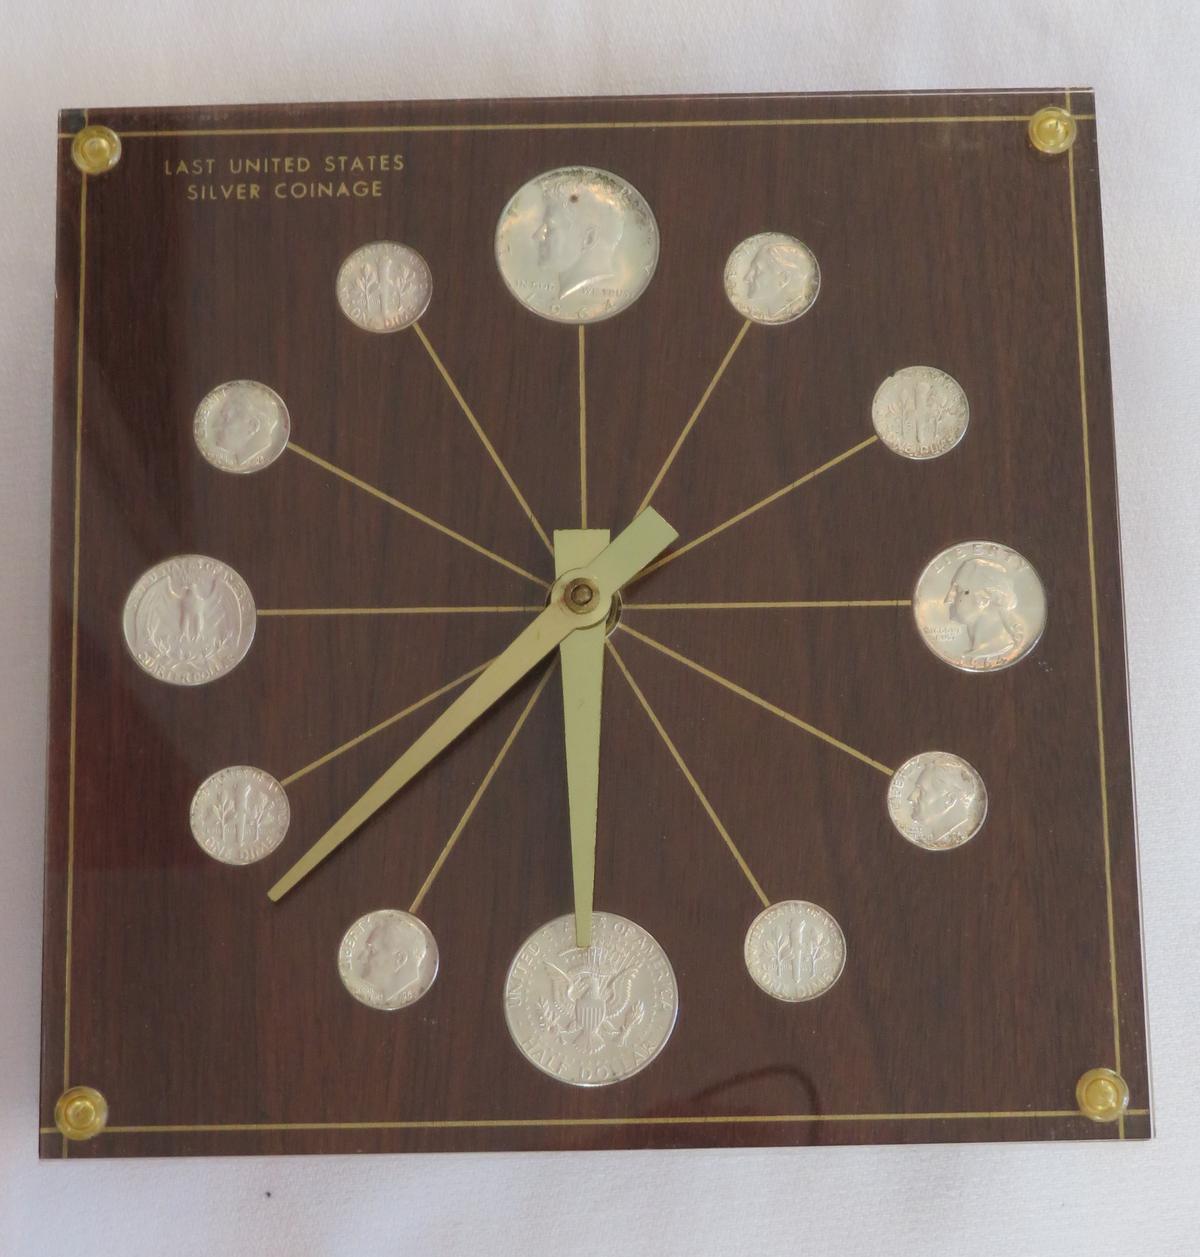 VINTAGE "LAST UNITED STATES SILVER COINAGE" WALL CLOCK